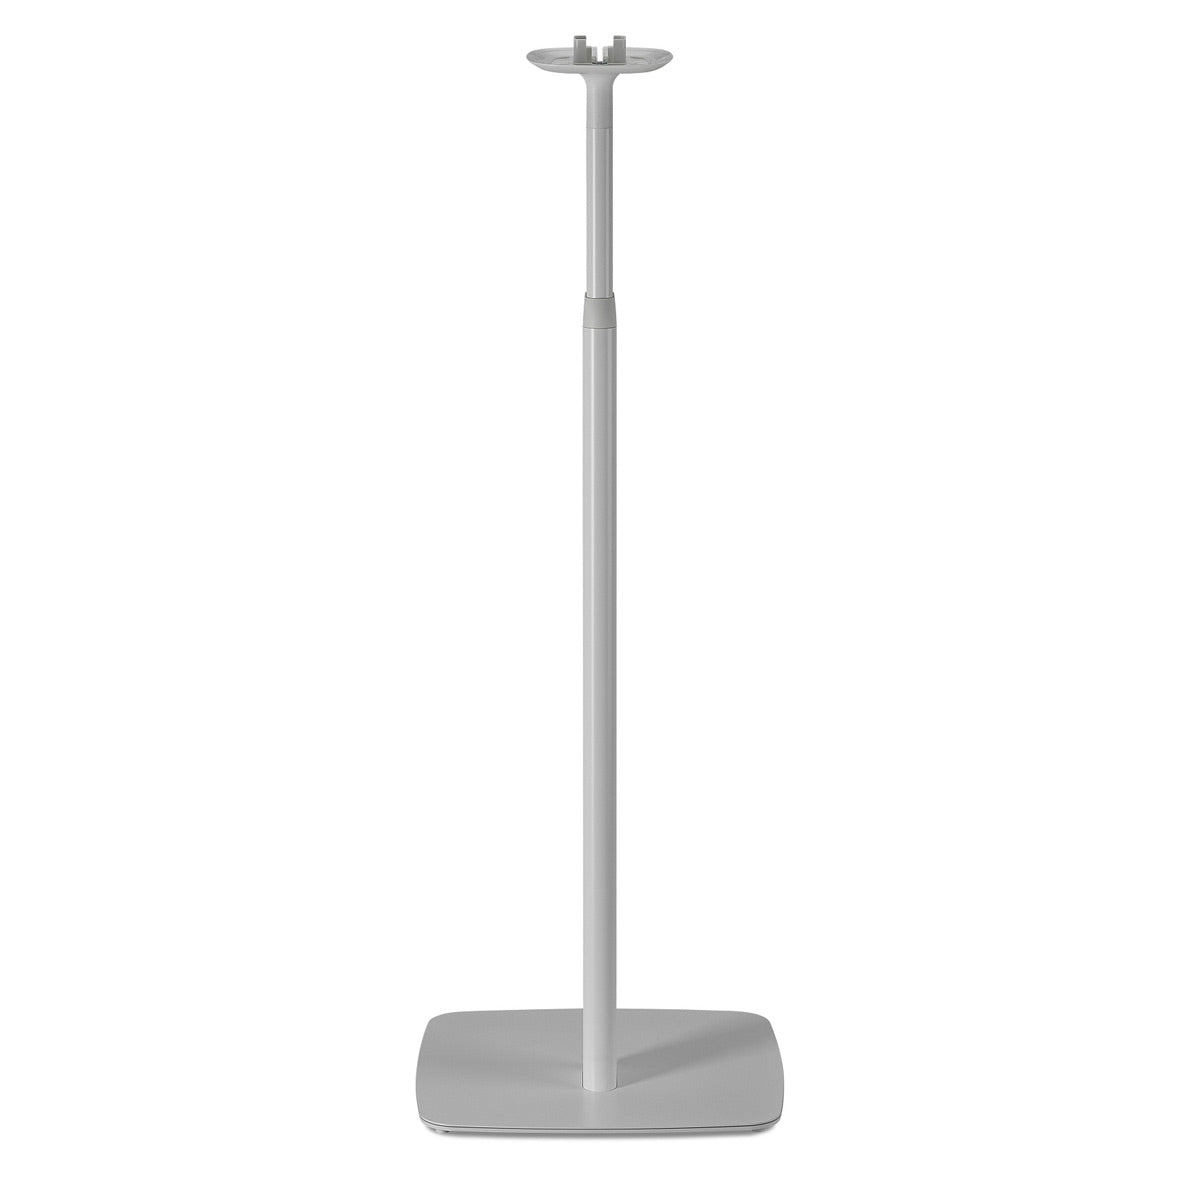 Flexson Adjustable Floorstands for Sonos One or PLAY:1 - Pair (White)